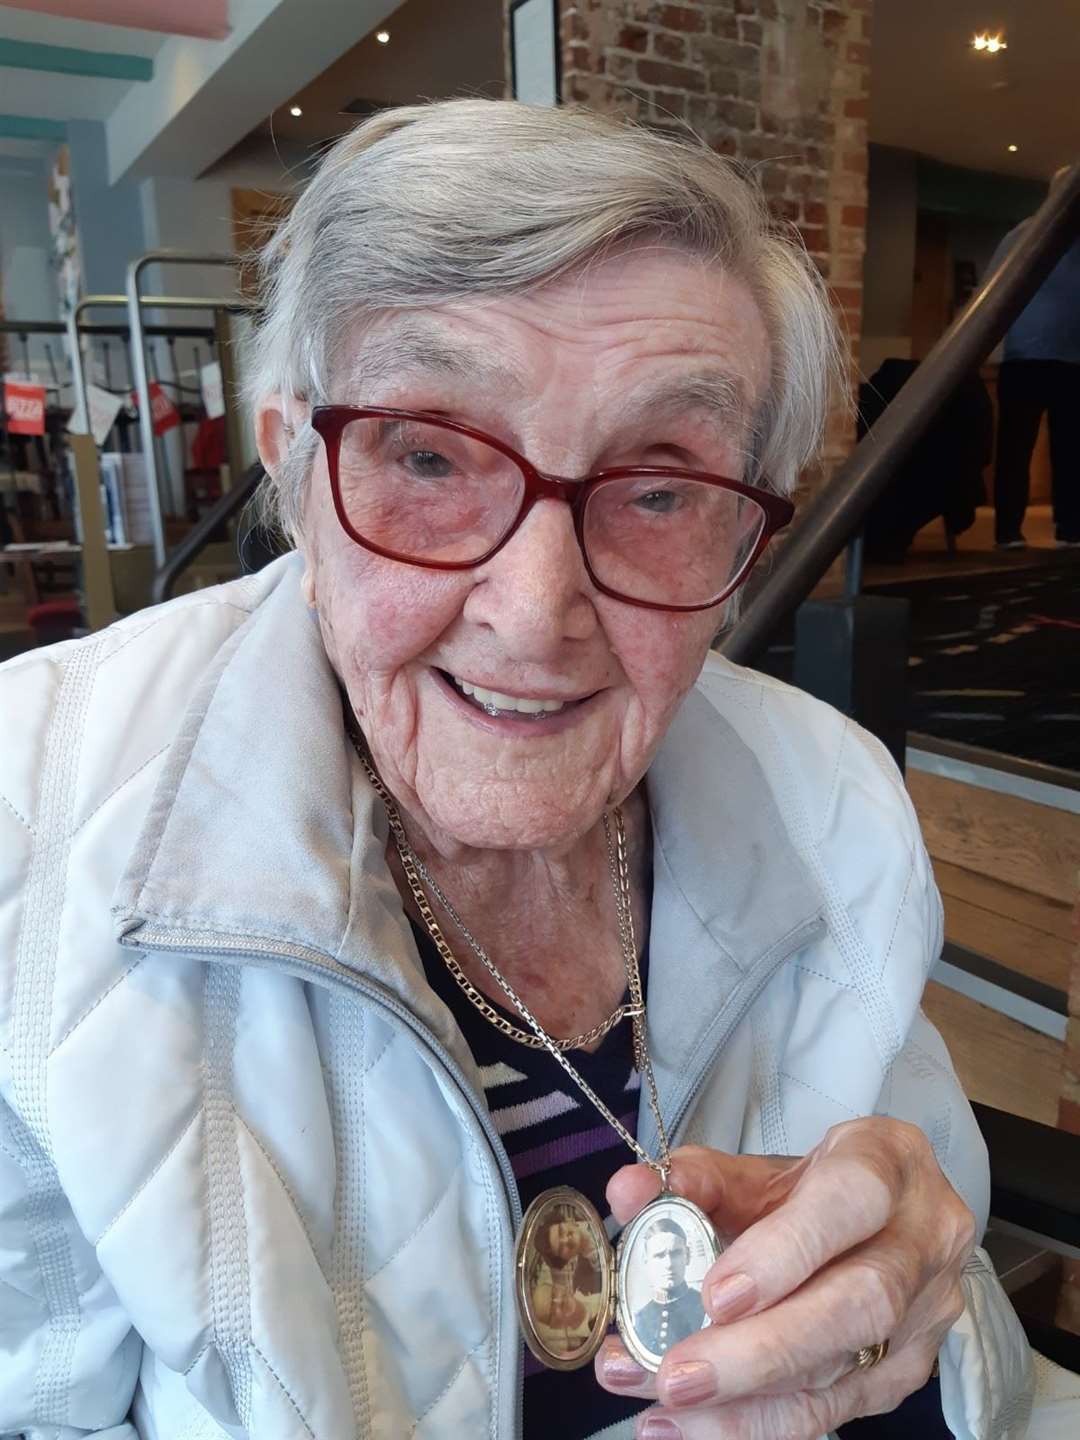 Former M&S cook Marjorie Guard with the locket she recieved as a retirement gift